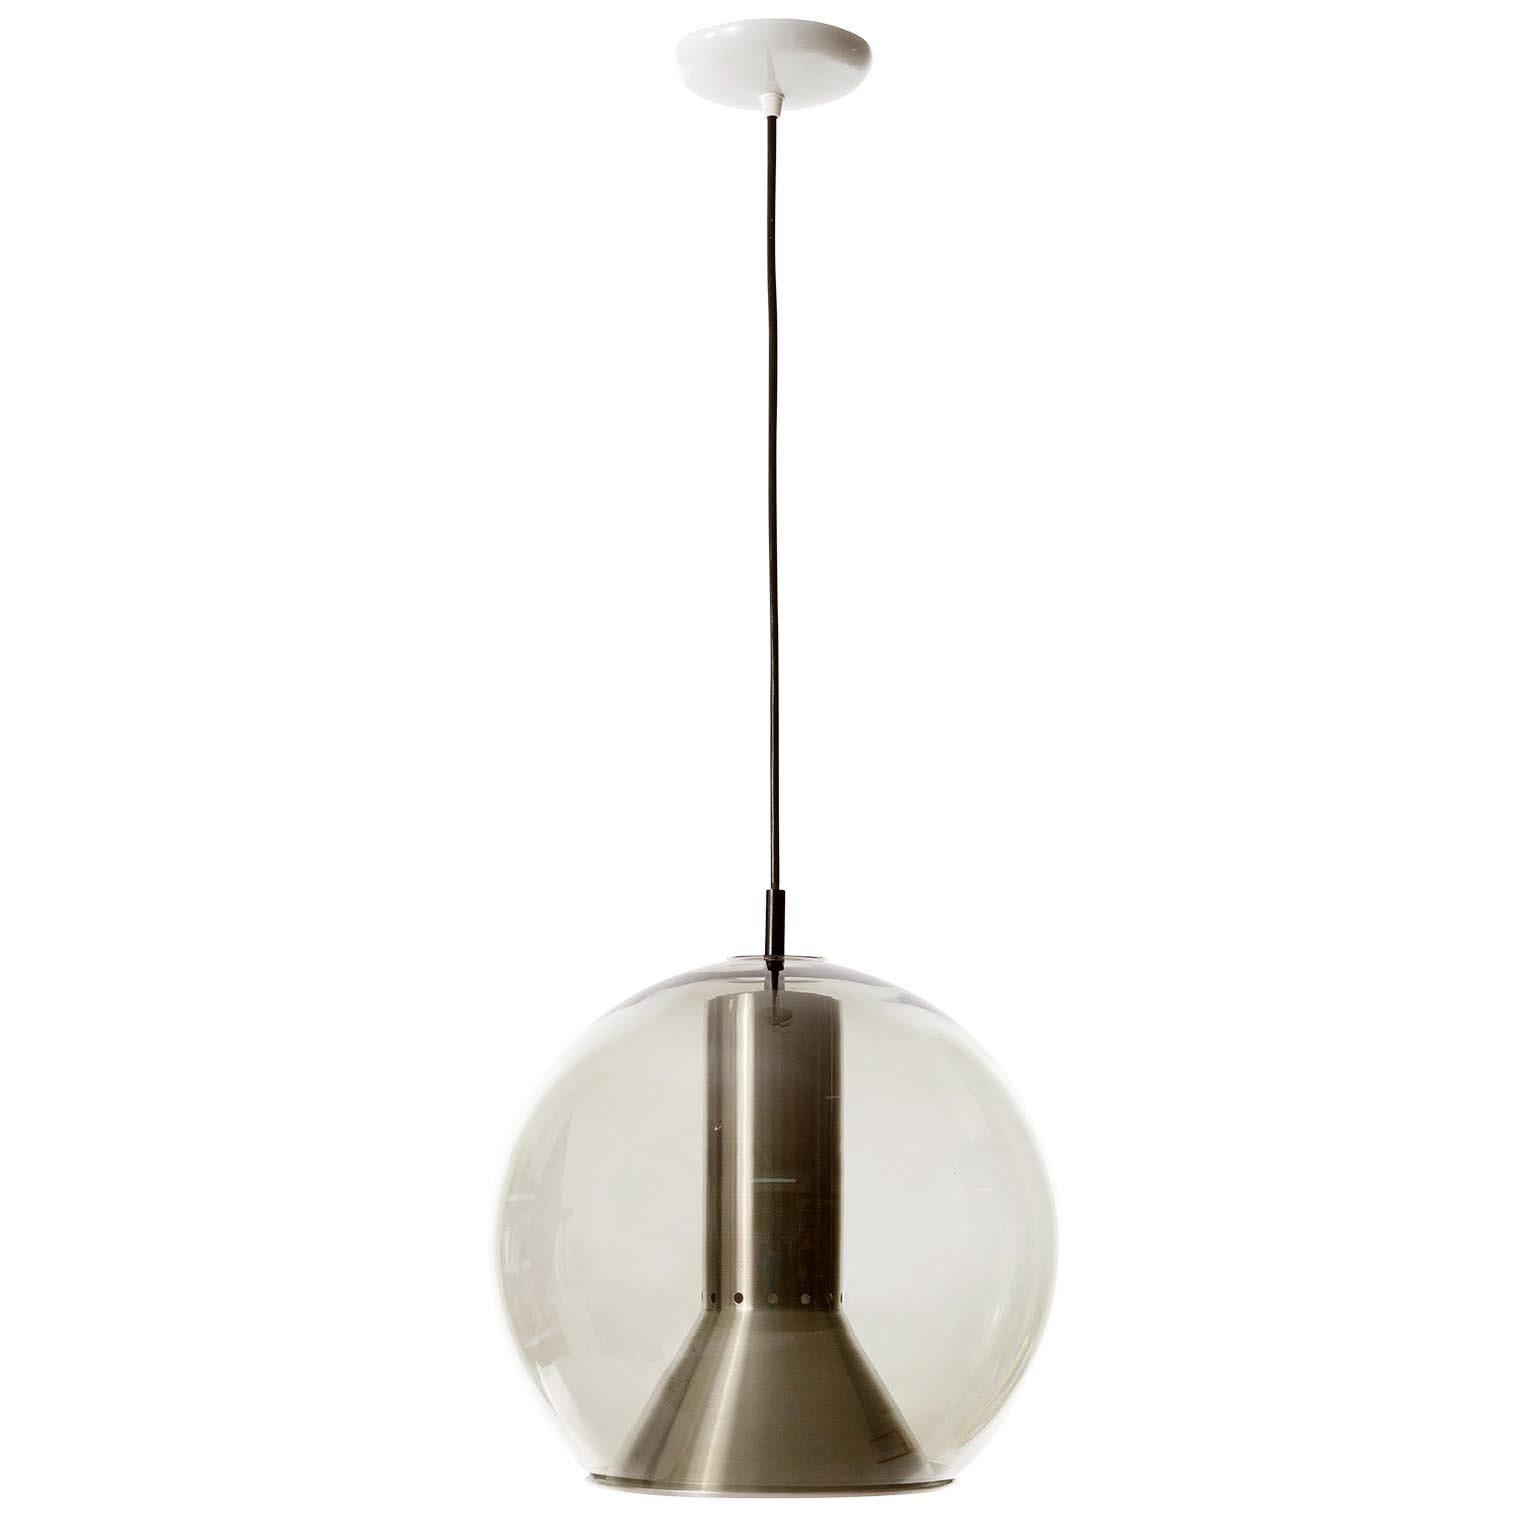 One of eight pendant lights or hanging lamps designed by Frank Ligtelijn for RAAK Amsterdam, Netherlands, manufactured in midcentury, circa 1960.
Each light features a grey smoked glass globe with an aluminium reflector inside. The globe is made of